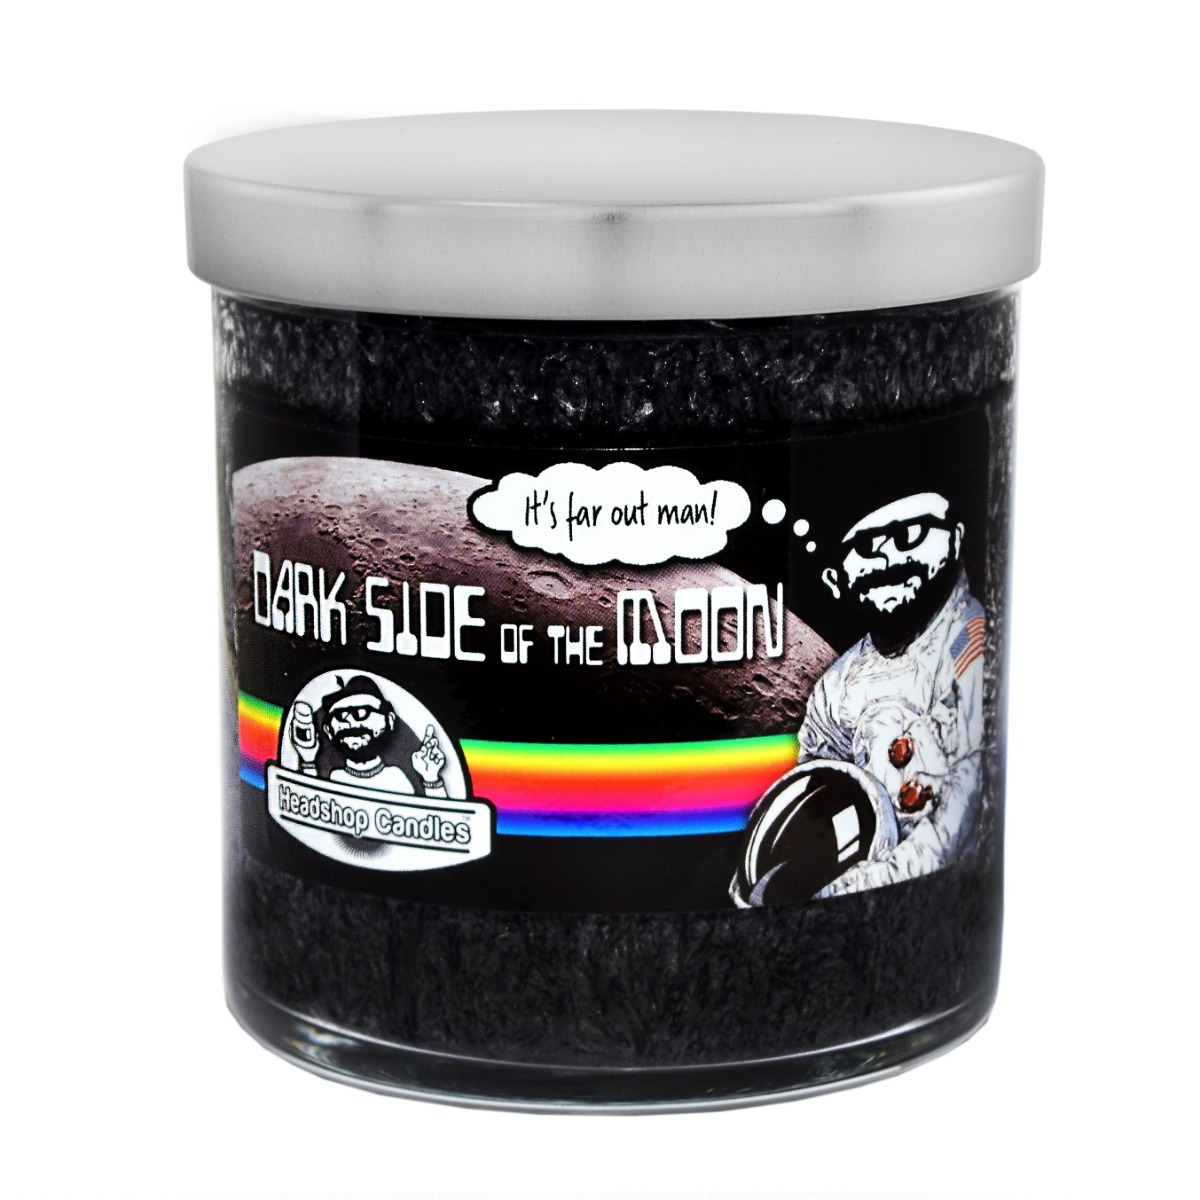 Headshop Candle Dark Side Of The Moon